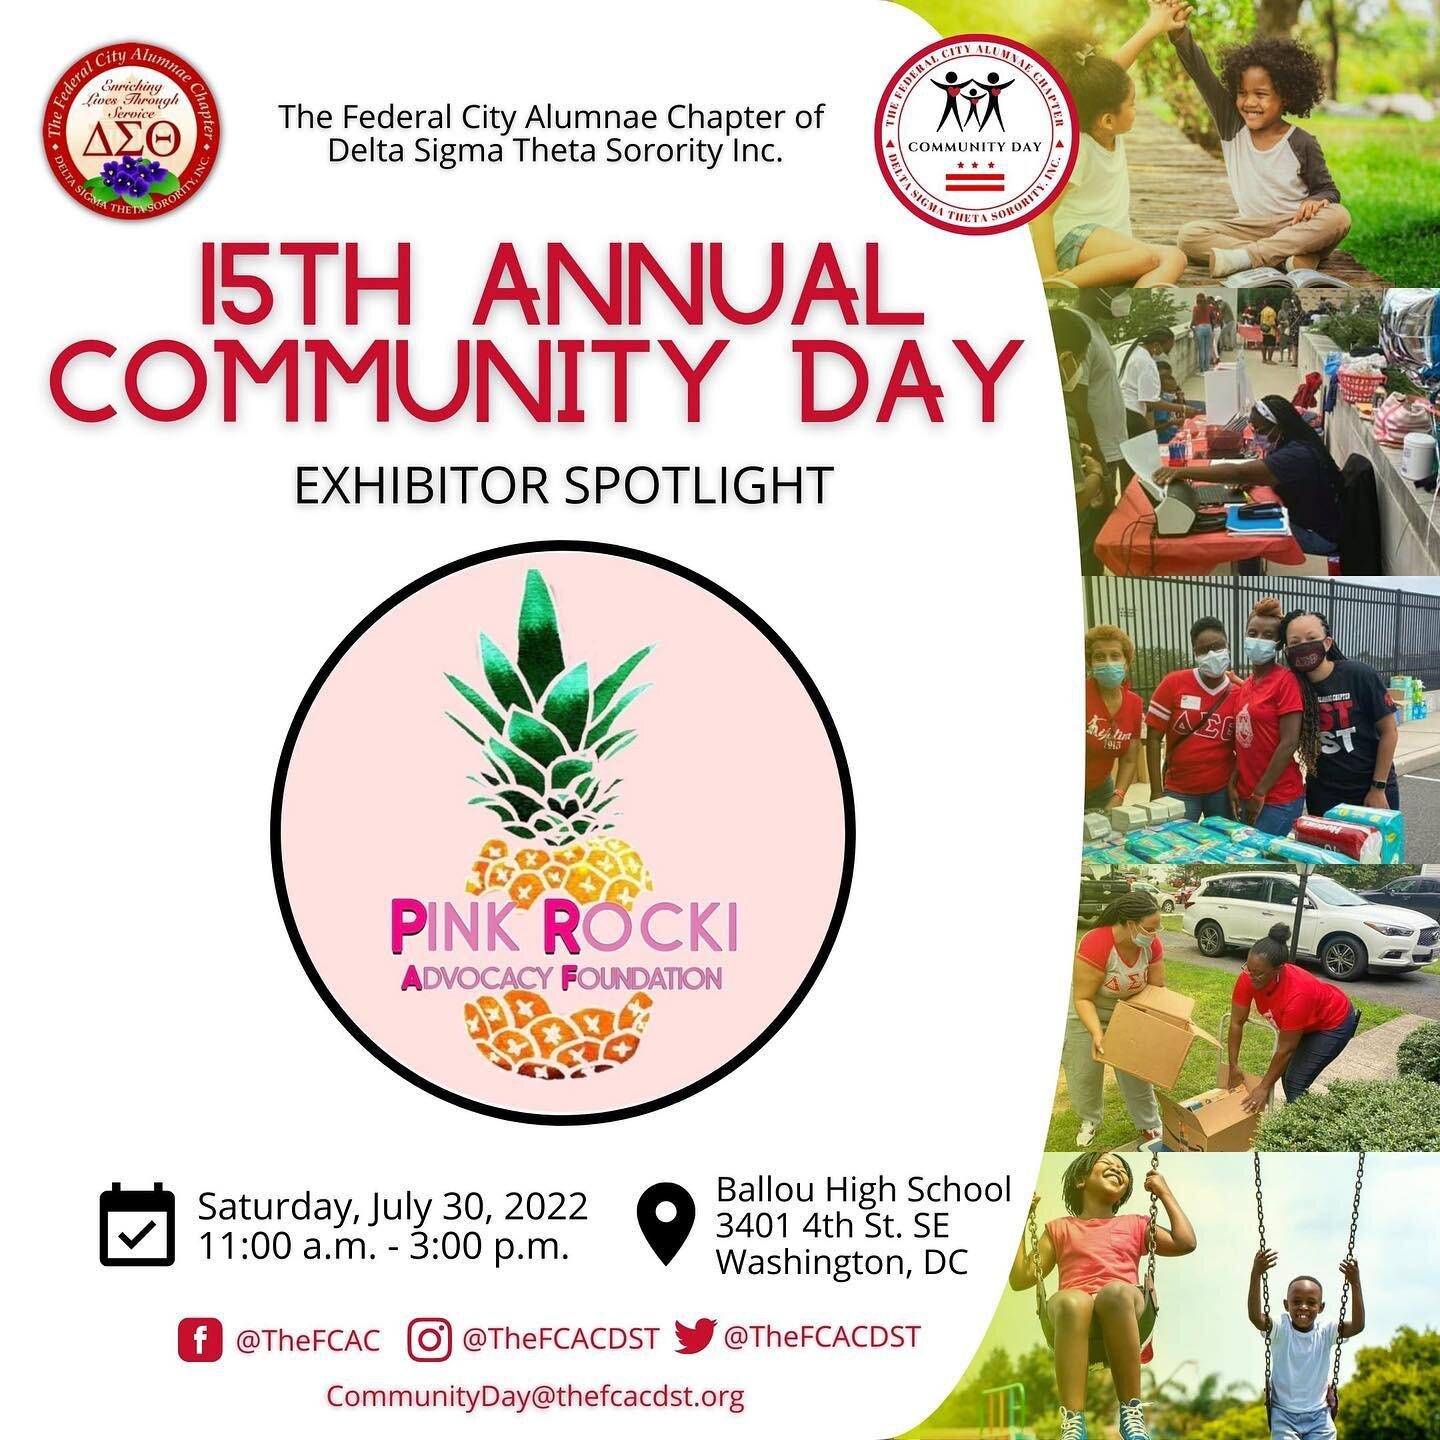 Come Out To @thefcacdst Community Day 
PINK ROCKI ADVOCACY FOUNDATION will be there 
July 30, 2022!